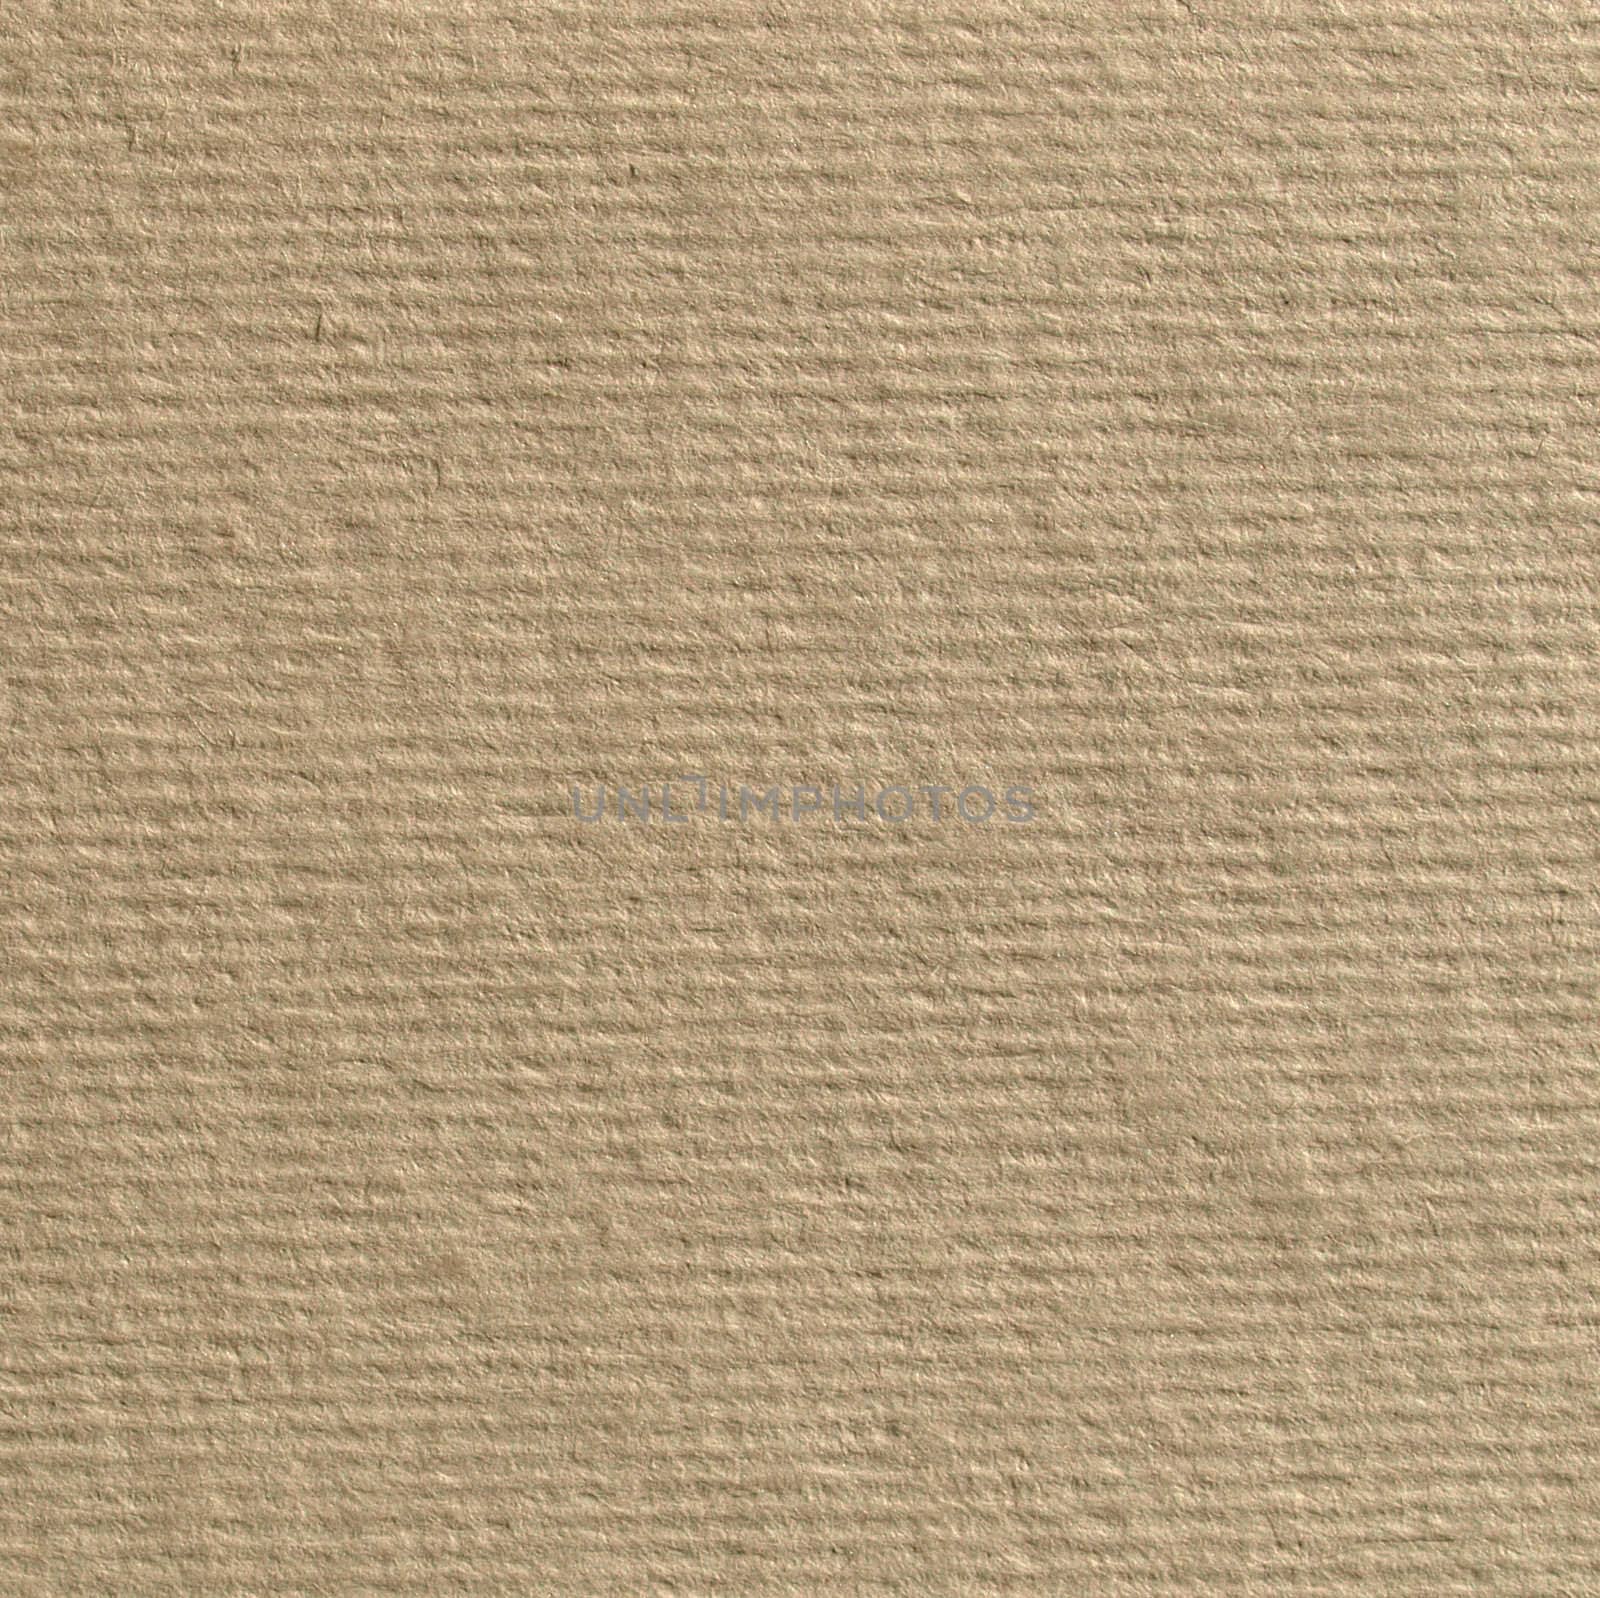 Blank sheet of brown paper material texture